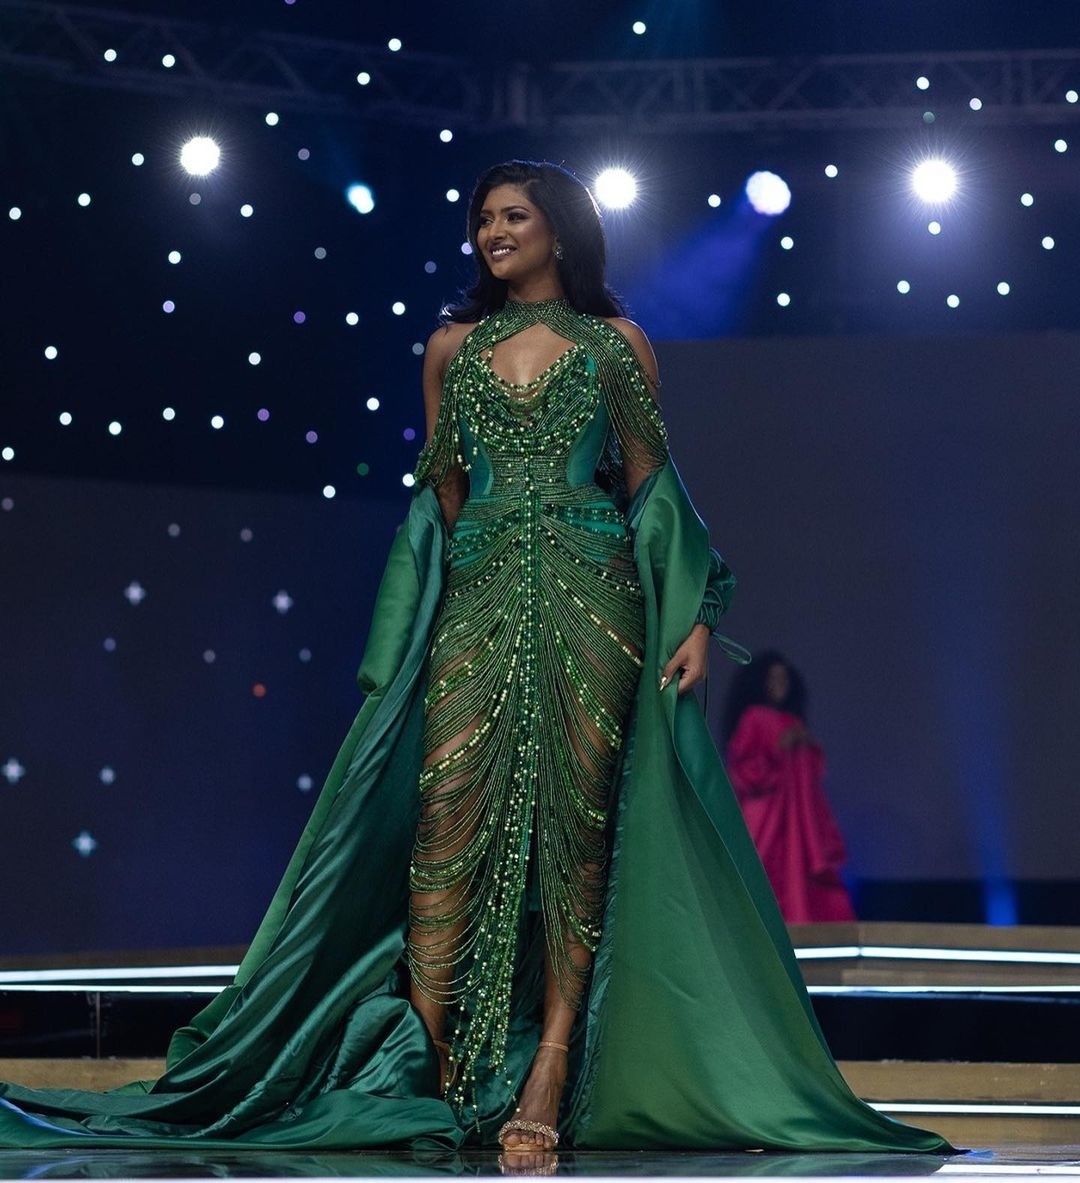 Congratulations to the 1st runner up 👑 #MissSA2023 @Official_MissSA the lovely Bryoni Govender dressed in Gert-Johan Coetzee. #gertjohancoetzee